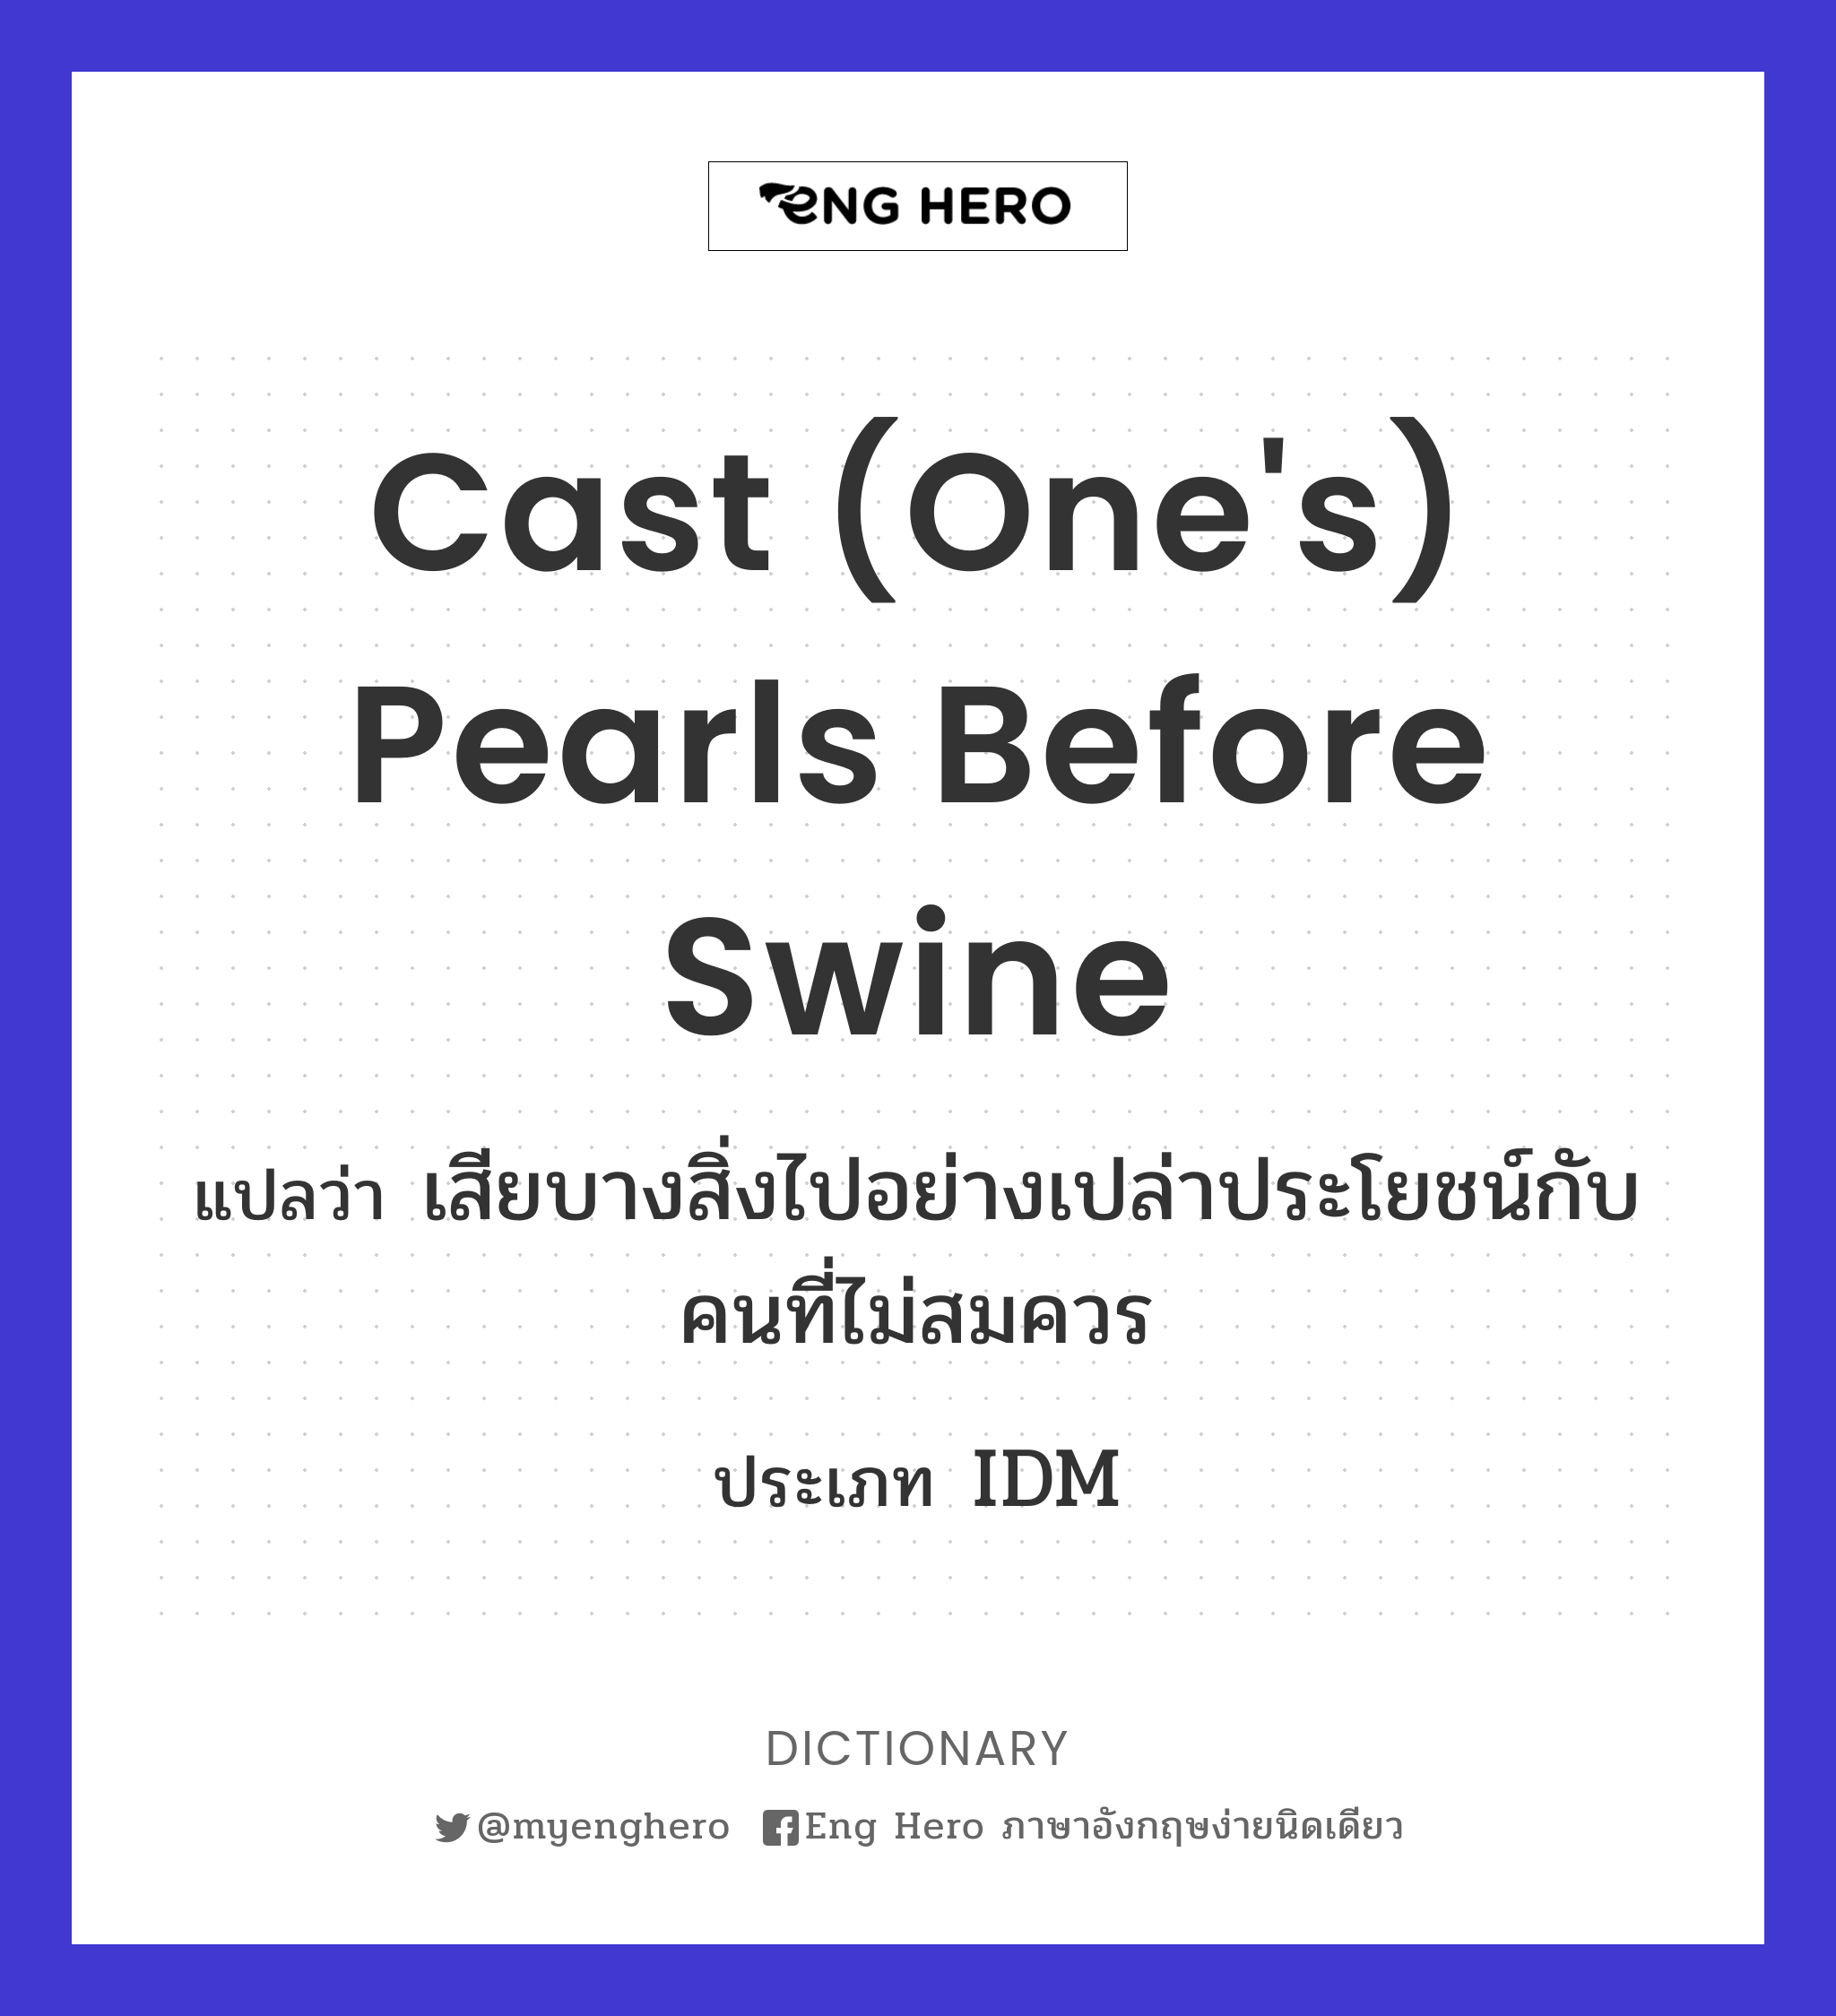 Cast (one's) pearls before swine